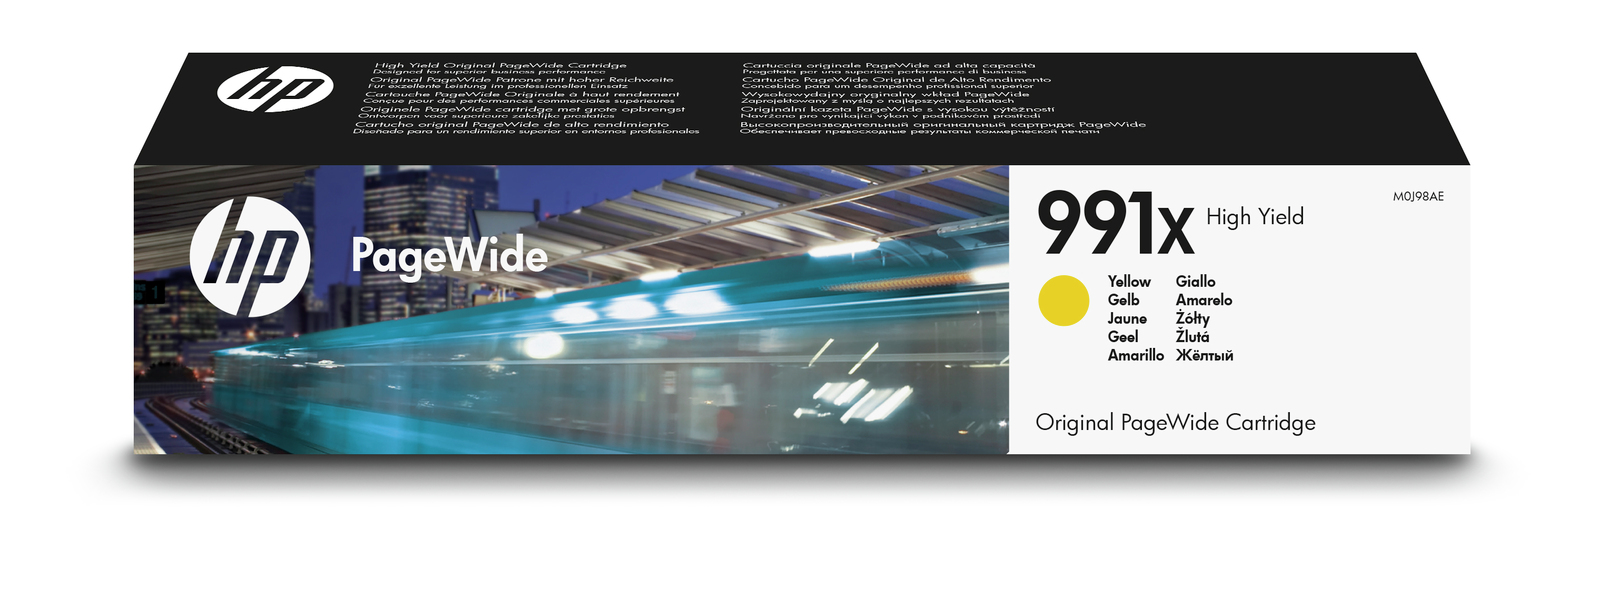 PageWide Pro 991X yellow ink cartridge